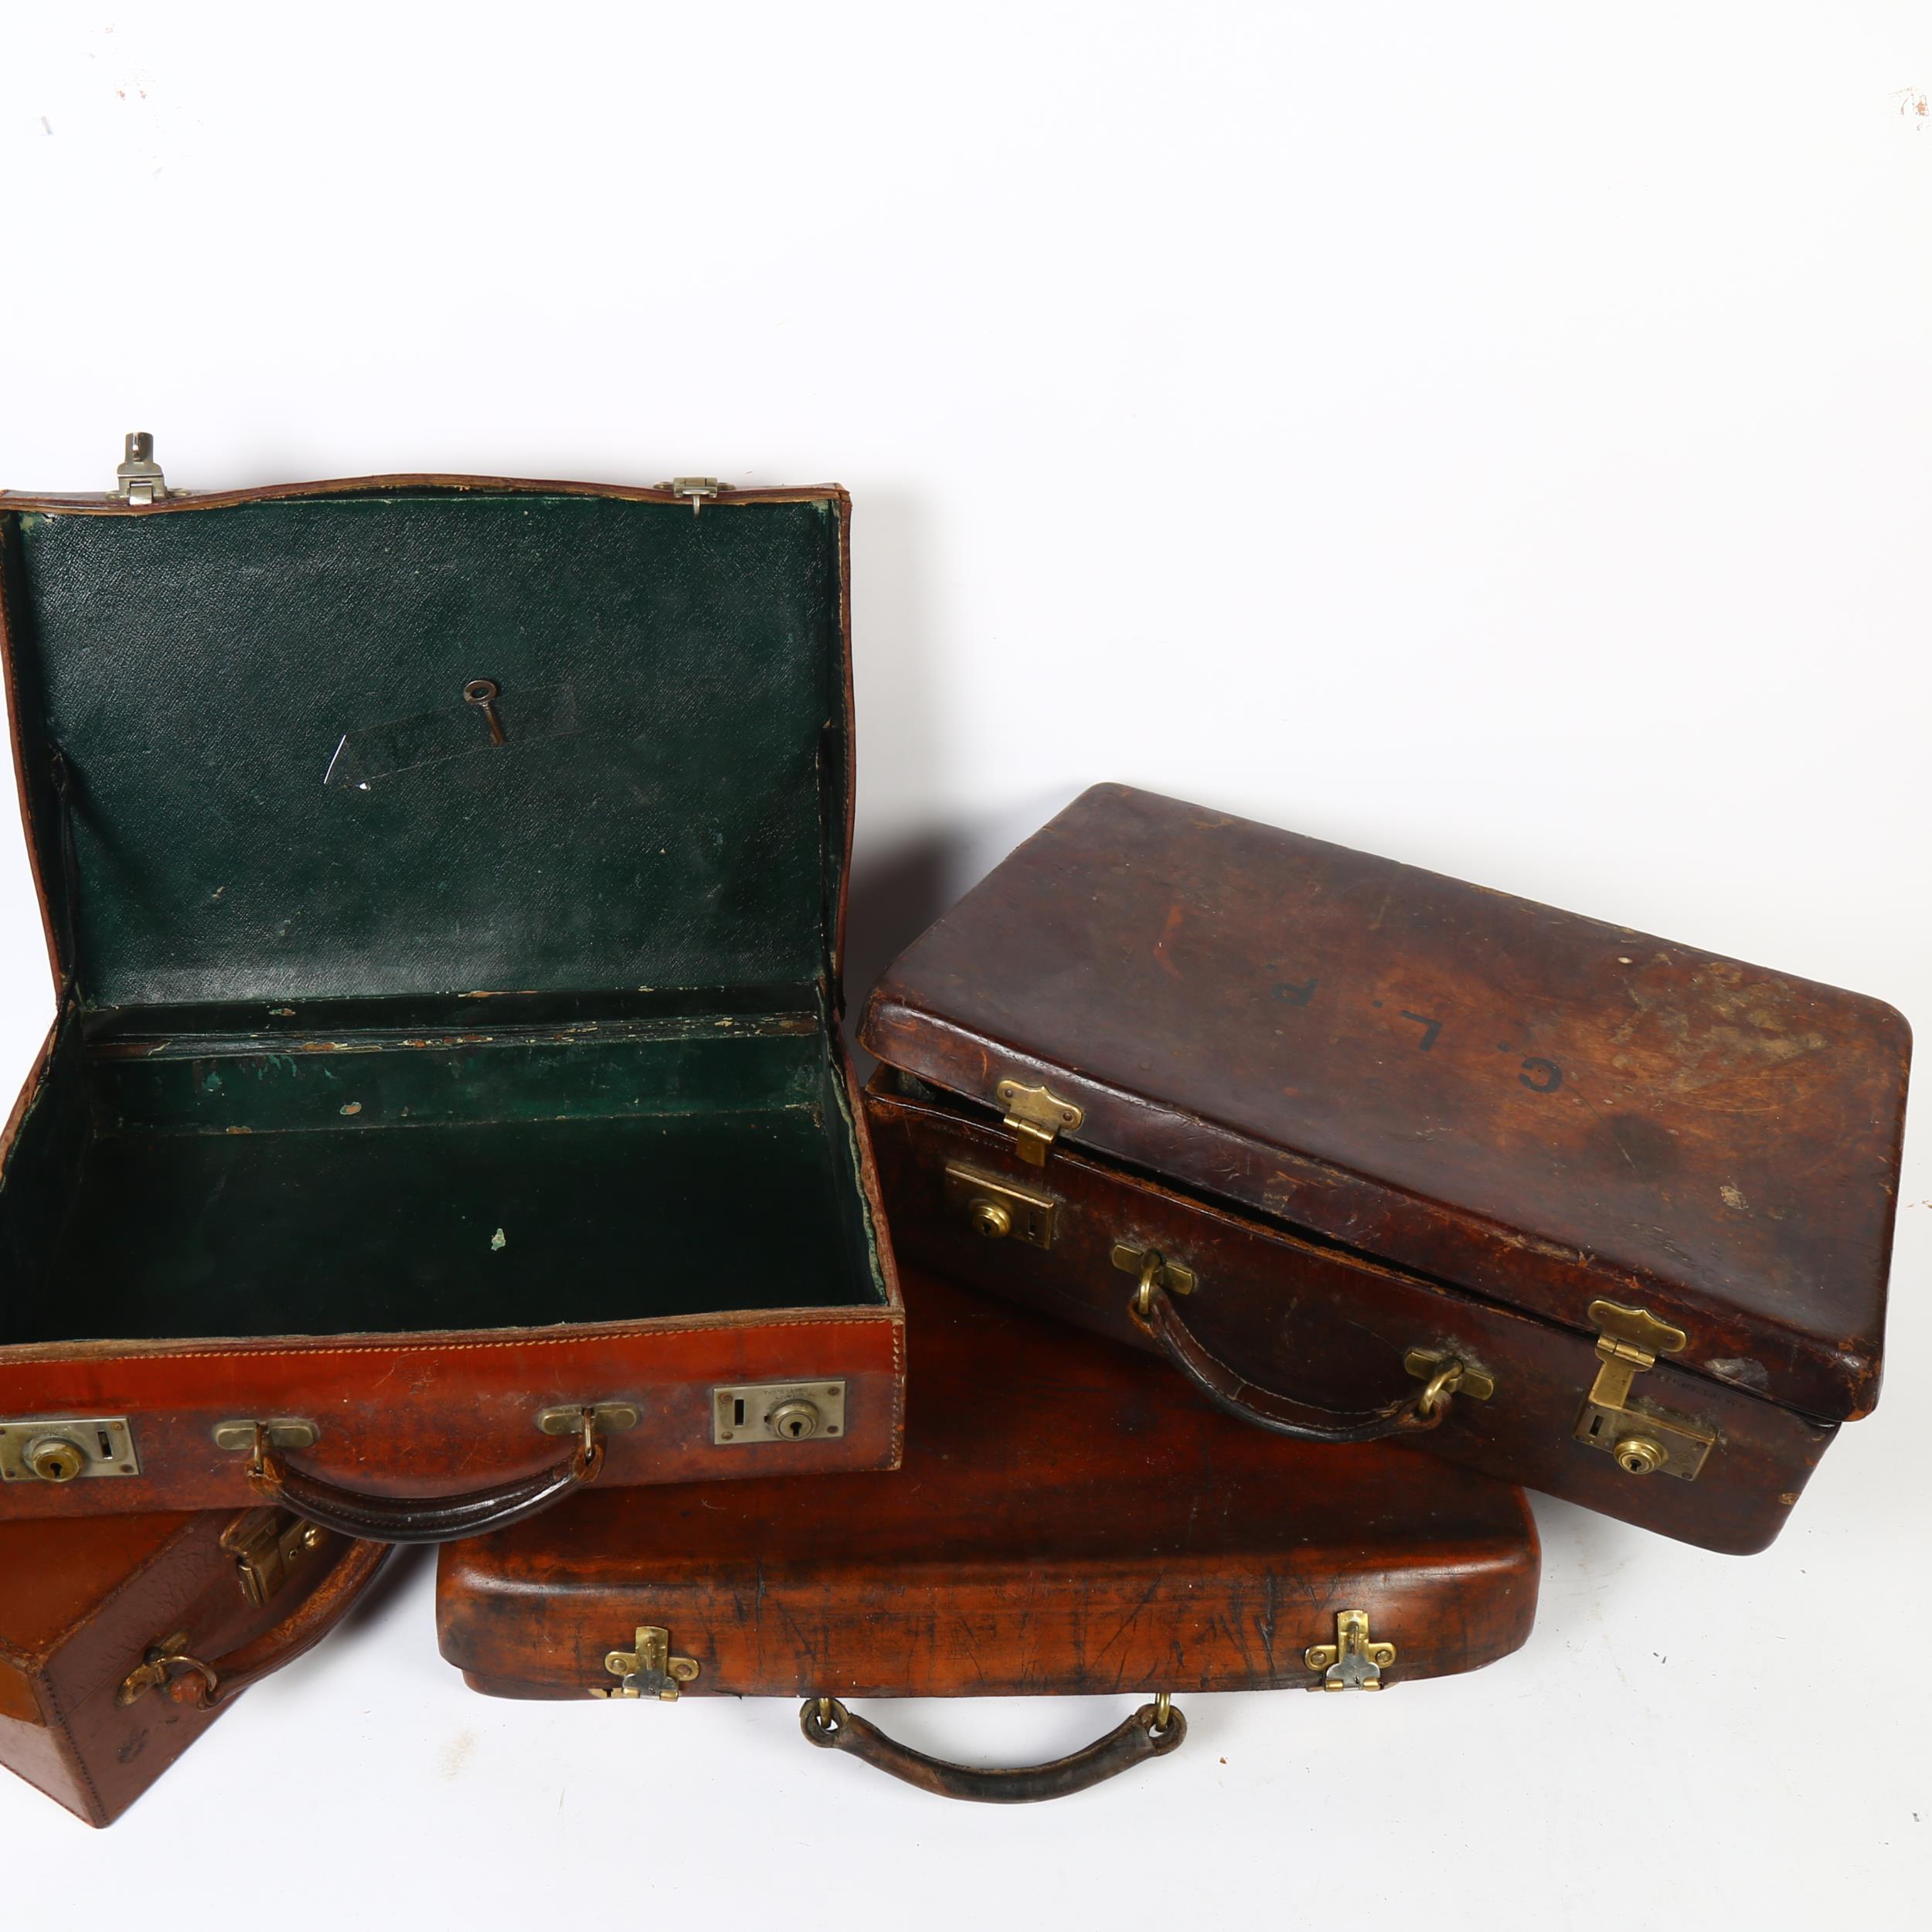 2 Victorian leather cases with brass locks, 1 with patent number and named with the initials CLP, - Image 2 of 2